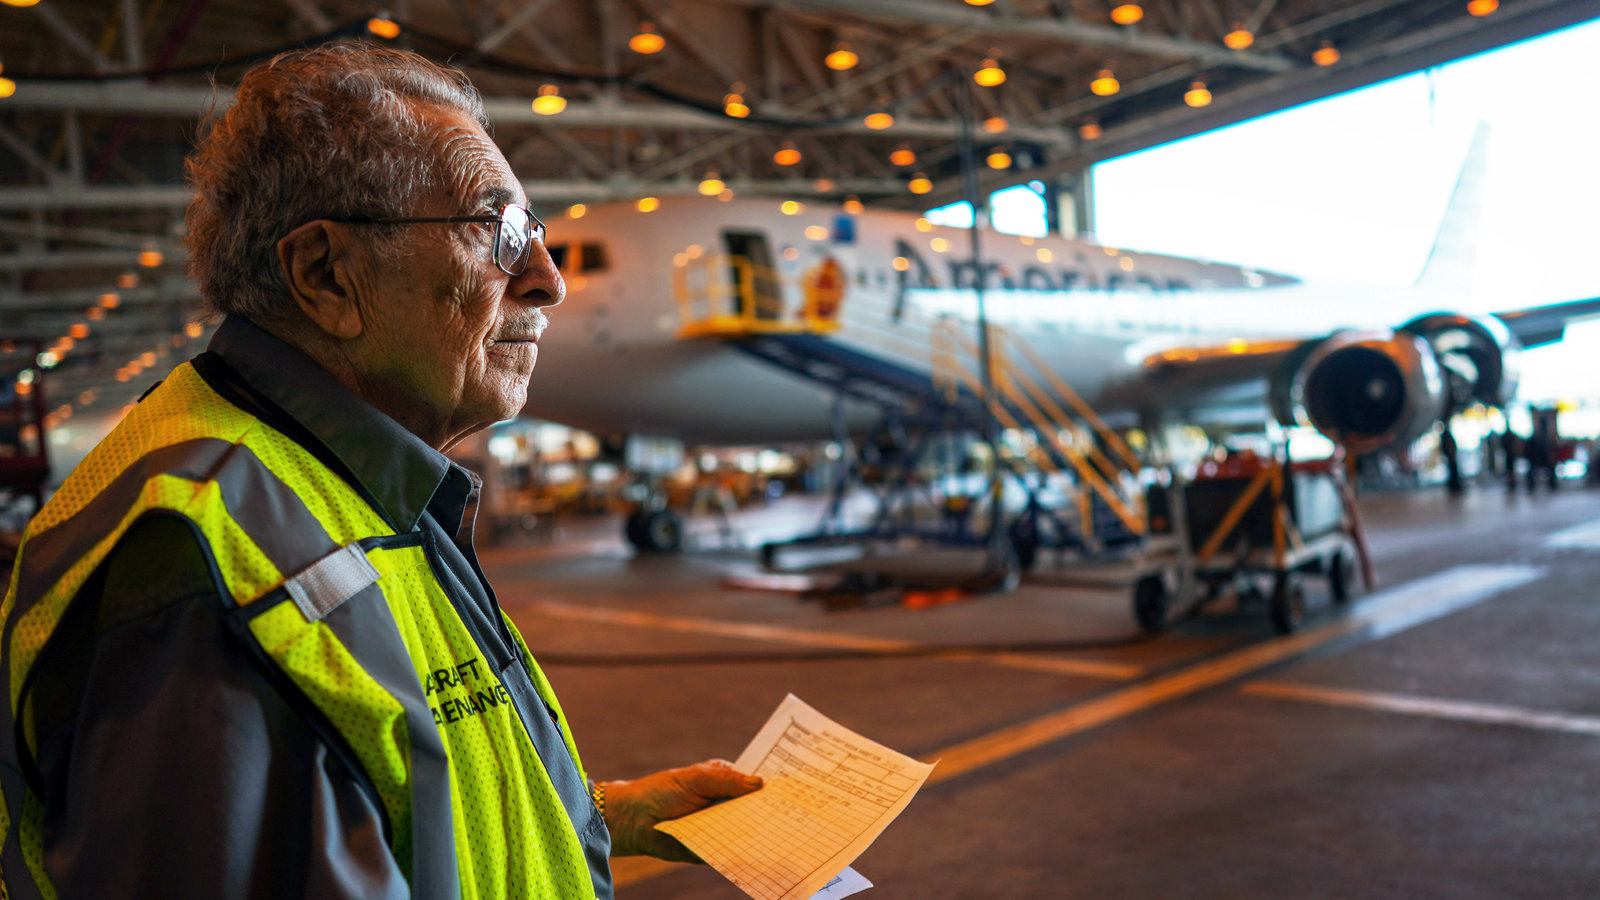 For 75 Years, a Mechanic Has Helped Keep Planes Aloft